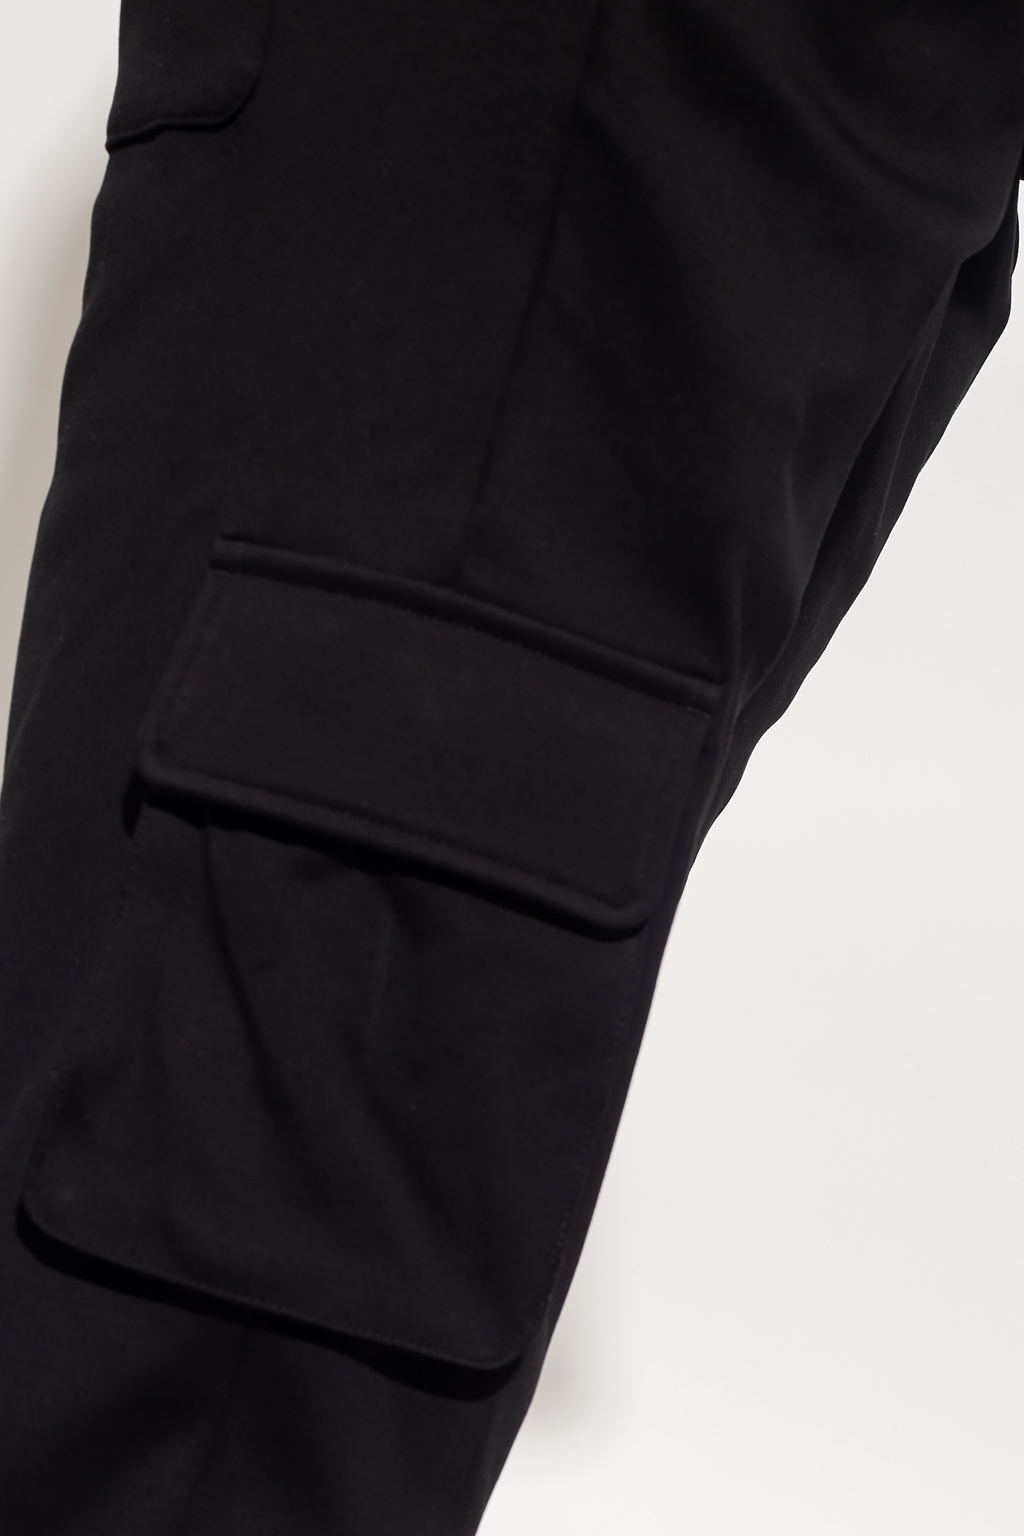 Moose Knuckles ‘Seaside’ cargo abstract trousers